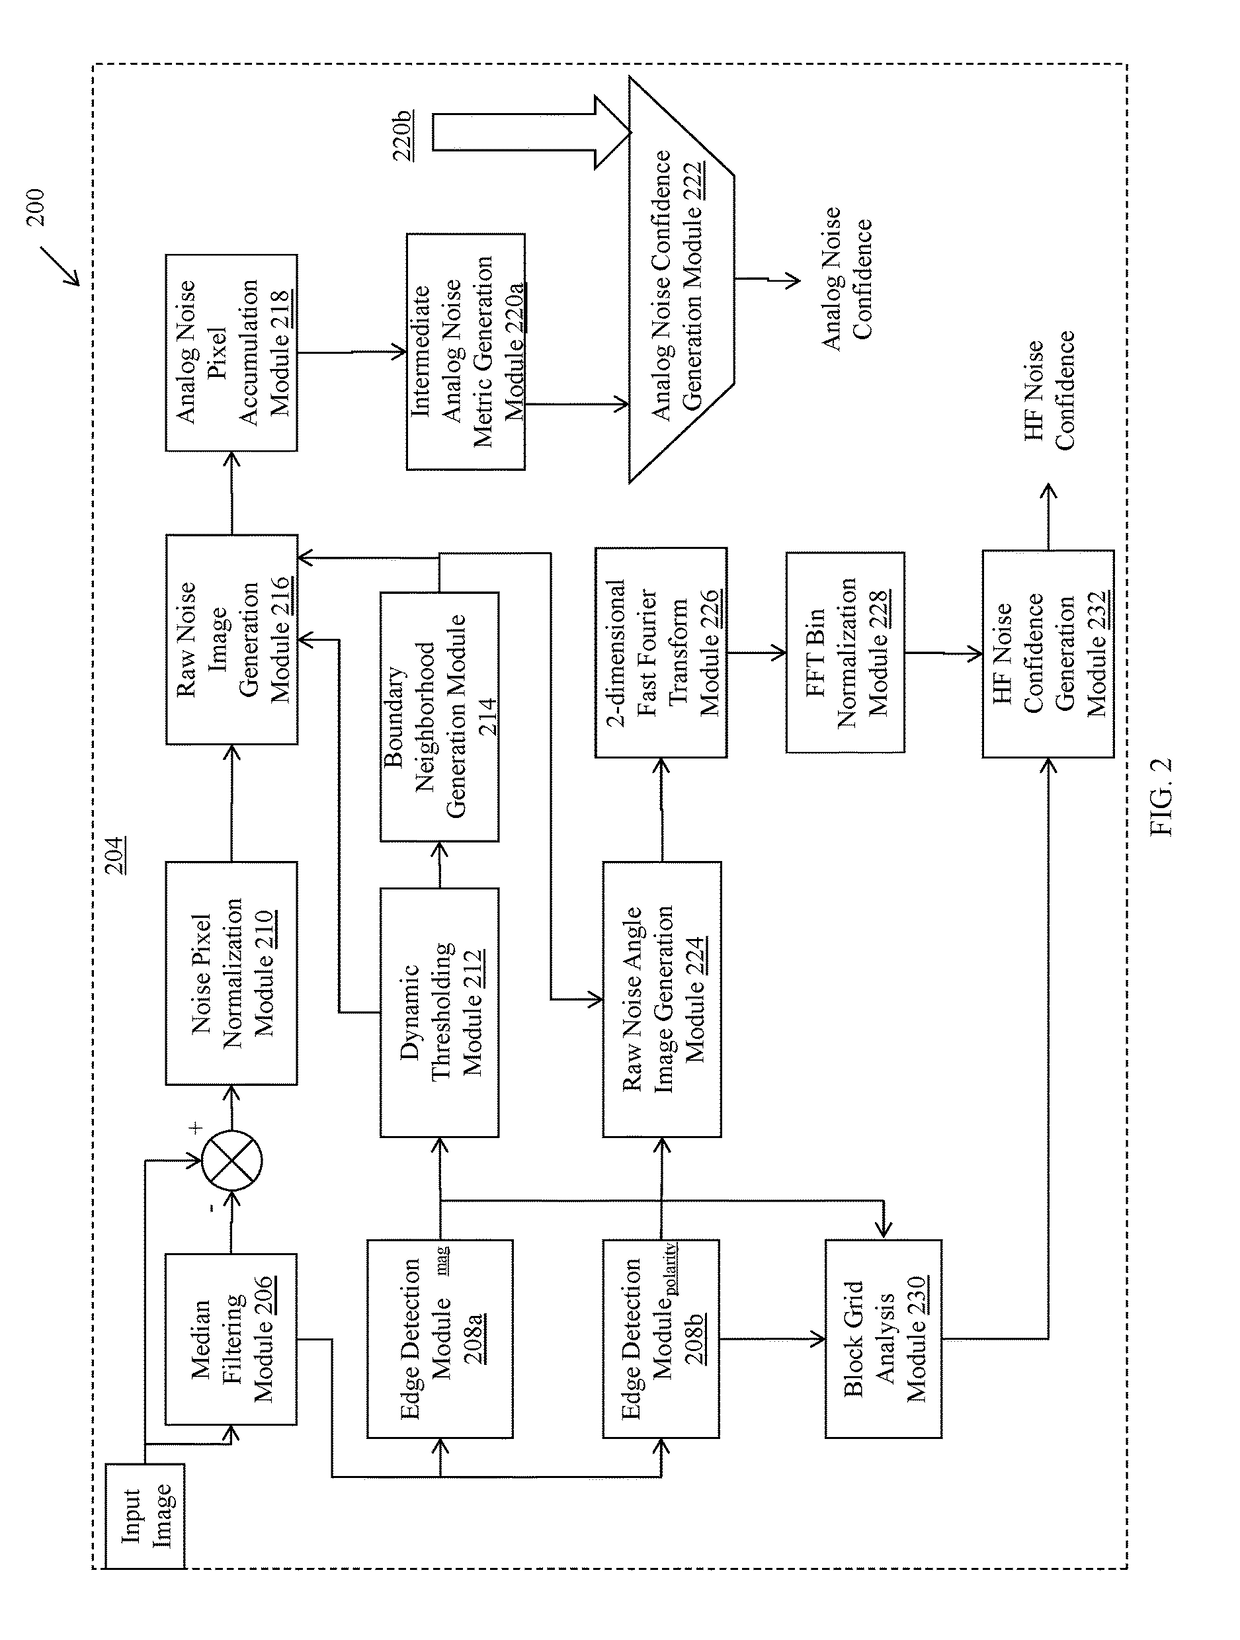 Method and system for detection of inherent noise present within a video source prior to digital video compression